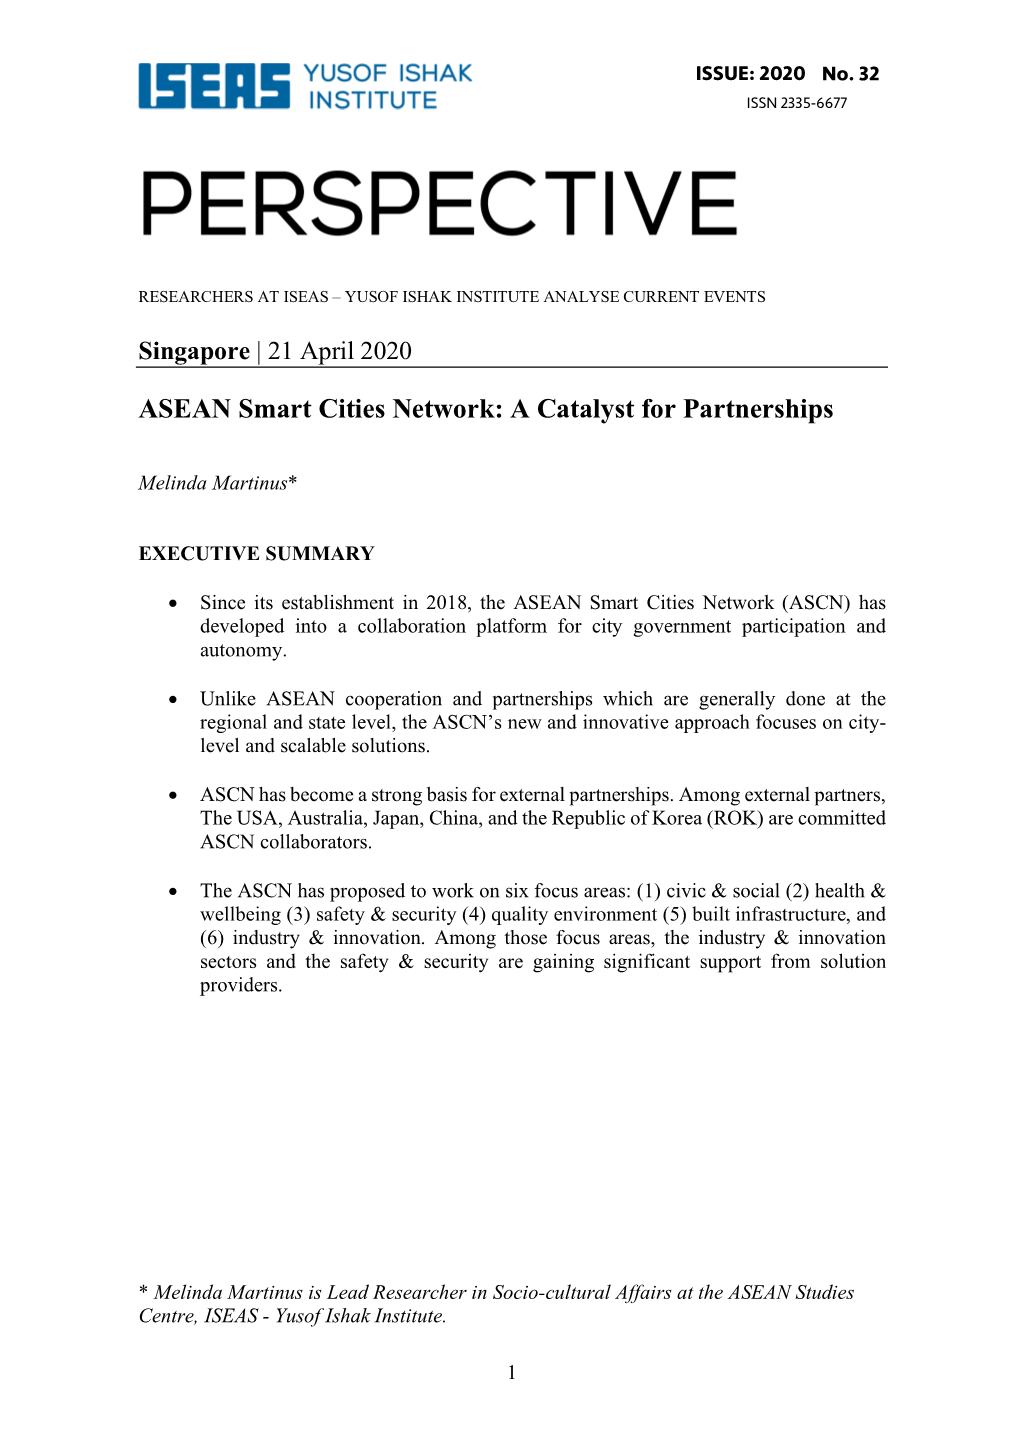 ASEAN Smart Cities Network: a Catalyst for Partnerships